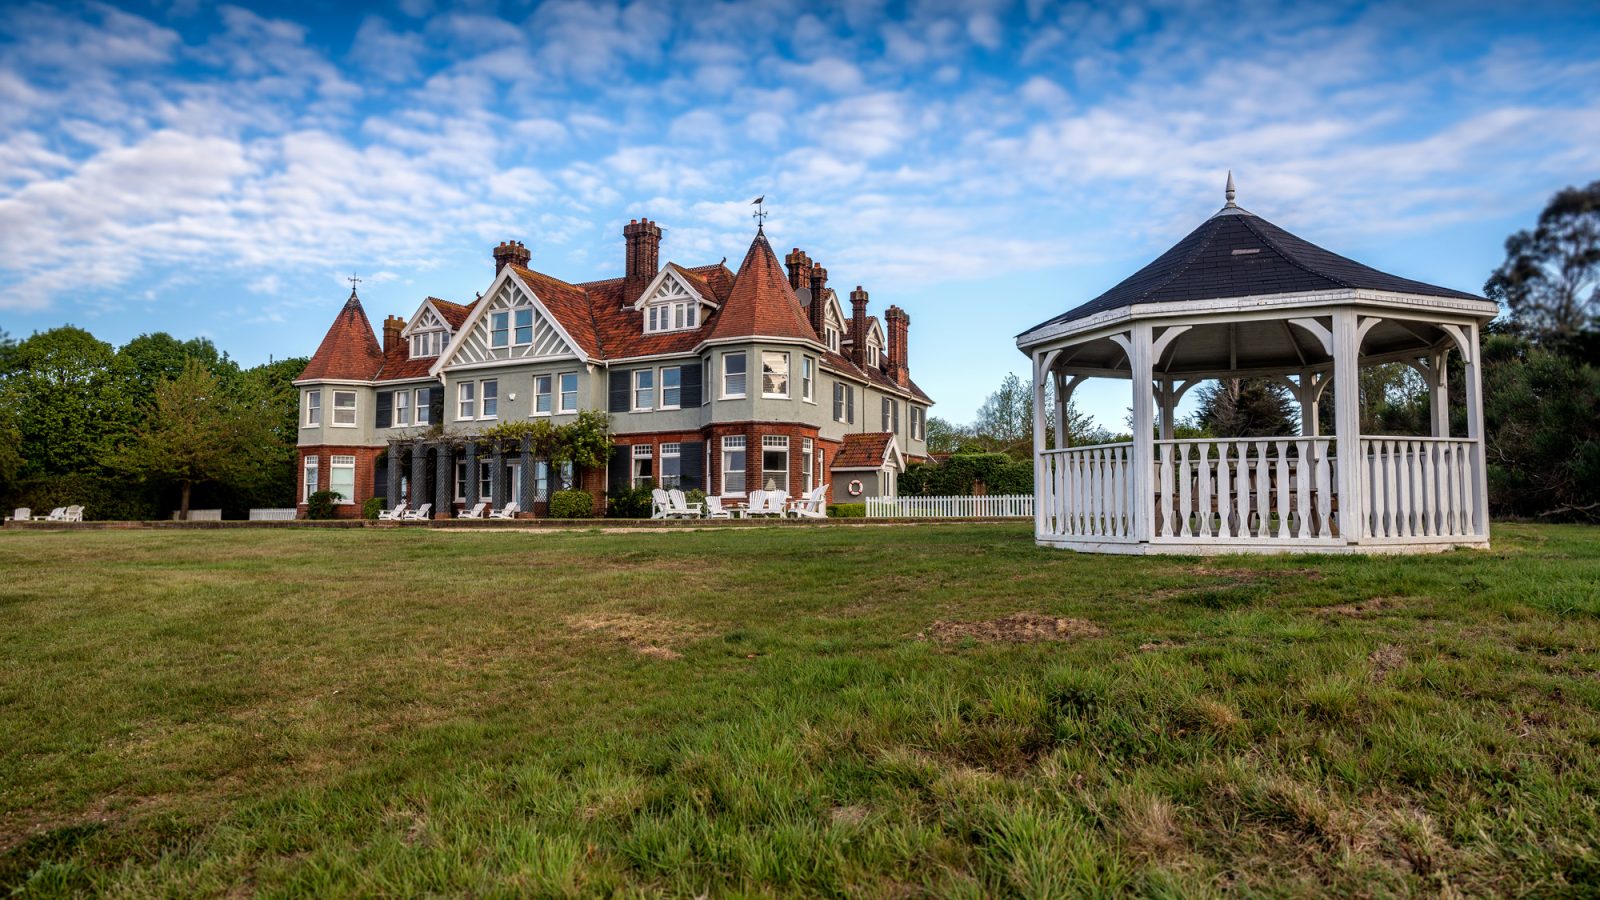  Osea Manor - kate & tom's Large Holiday Homes